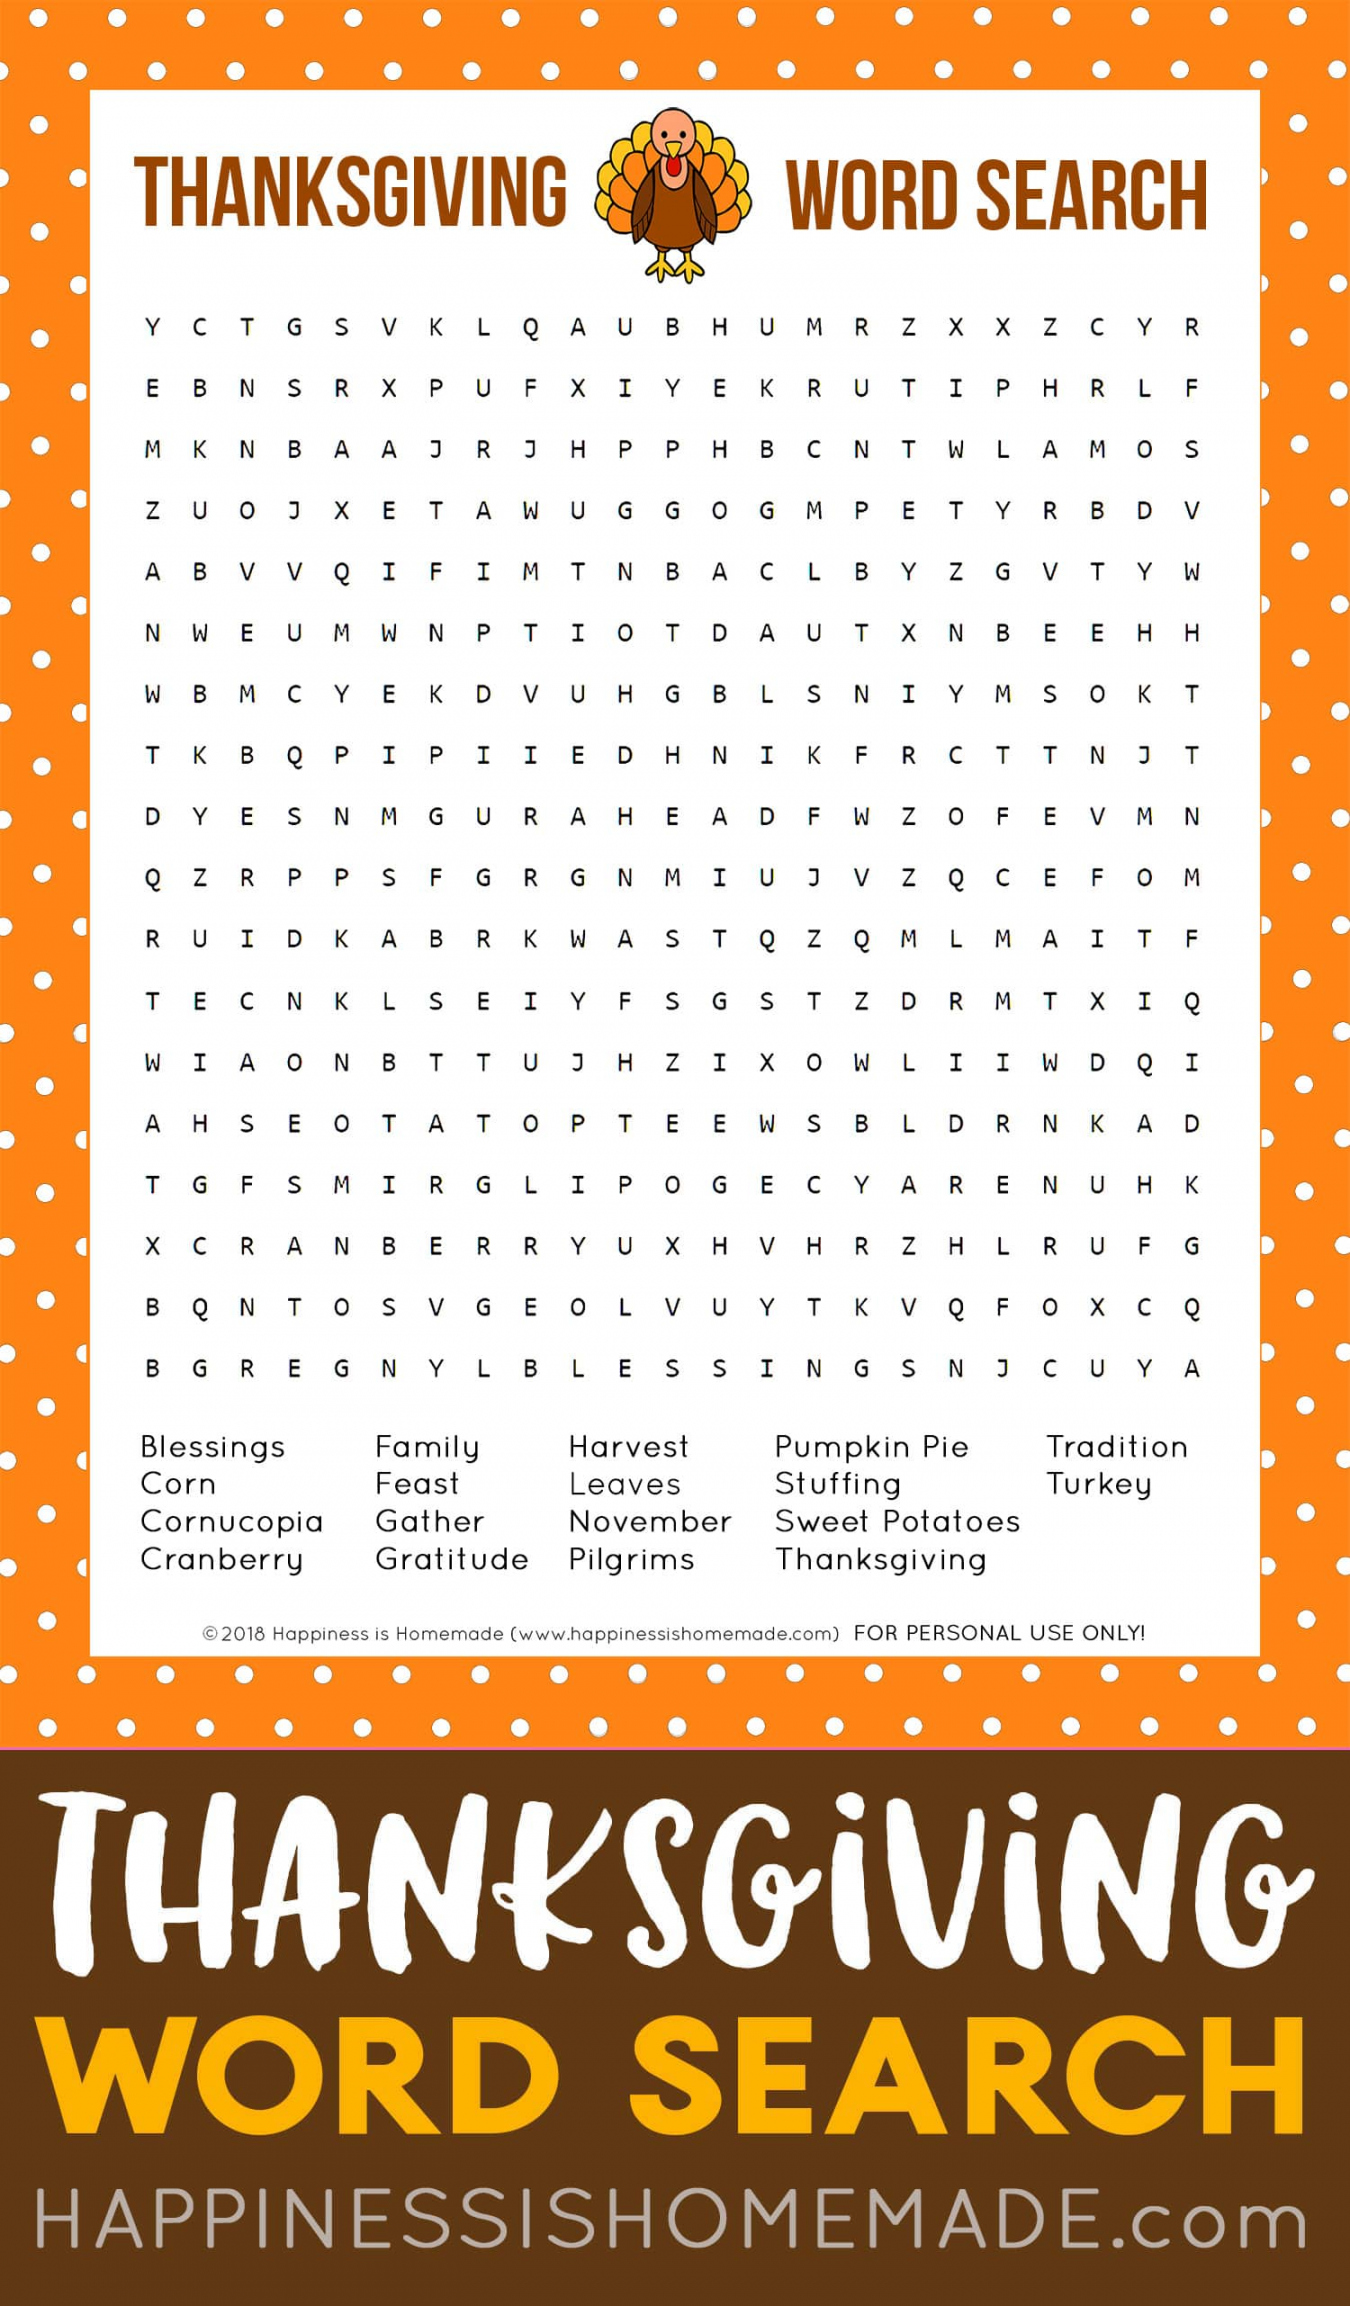 Thanksgiving Word Search Printable - Happiness is Homemade - FREE Printables - Free Printable Thanksgiving Word Search